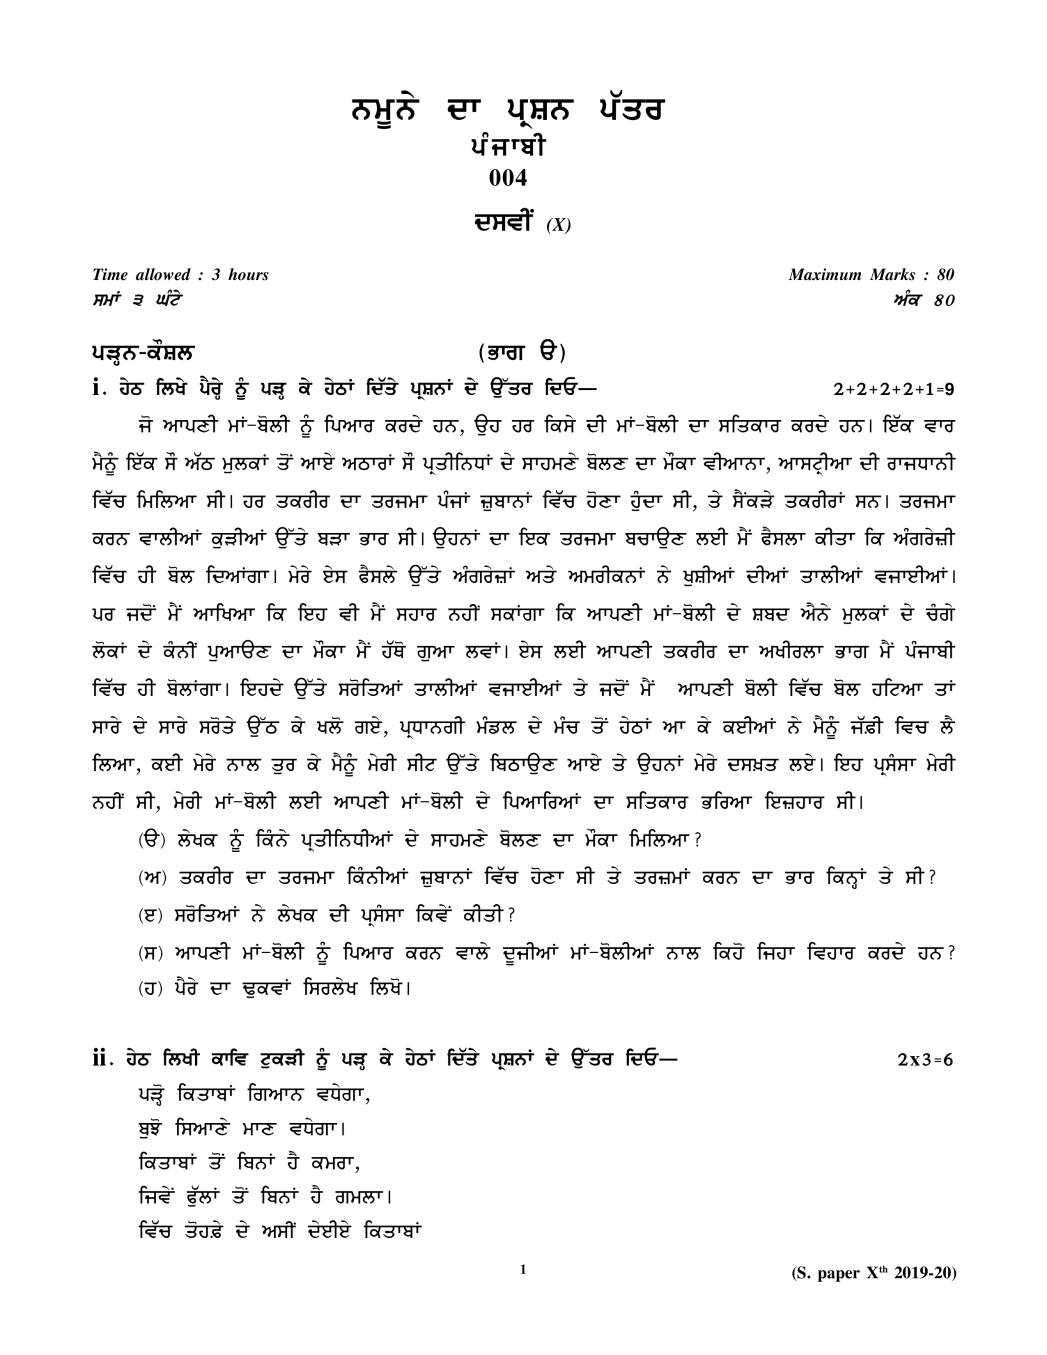 CBSE Class 10 Sample Paper 2020 for Punjabi - Page 1